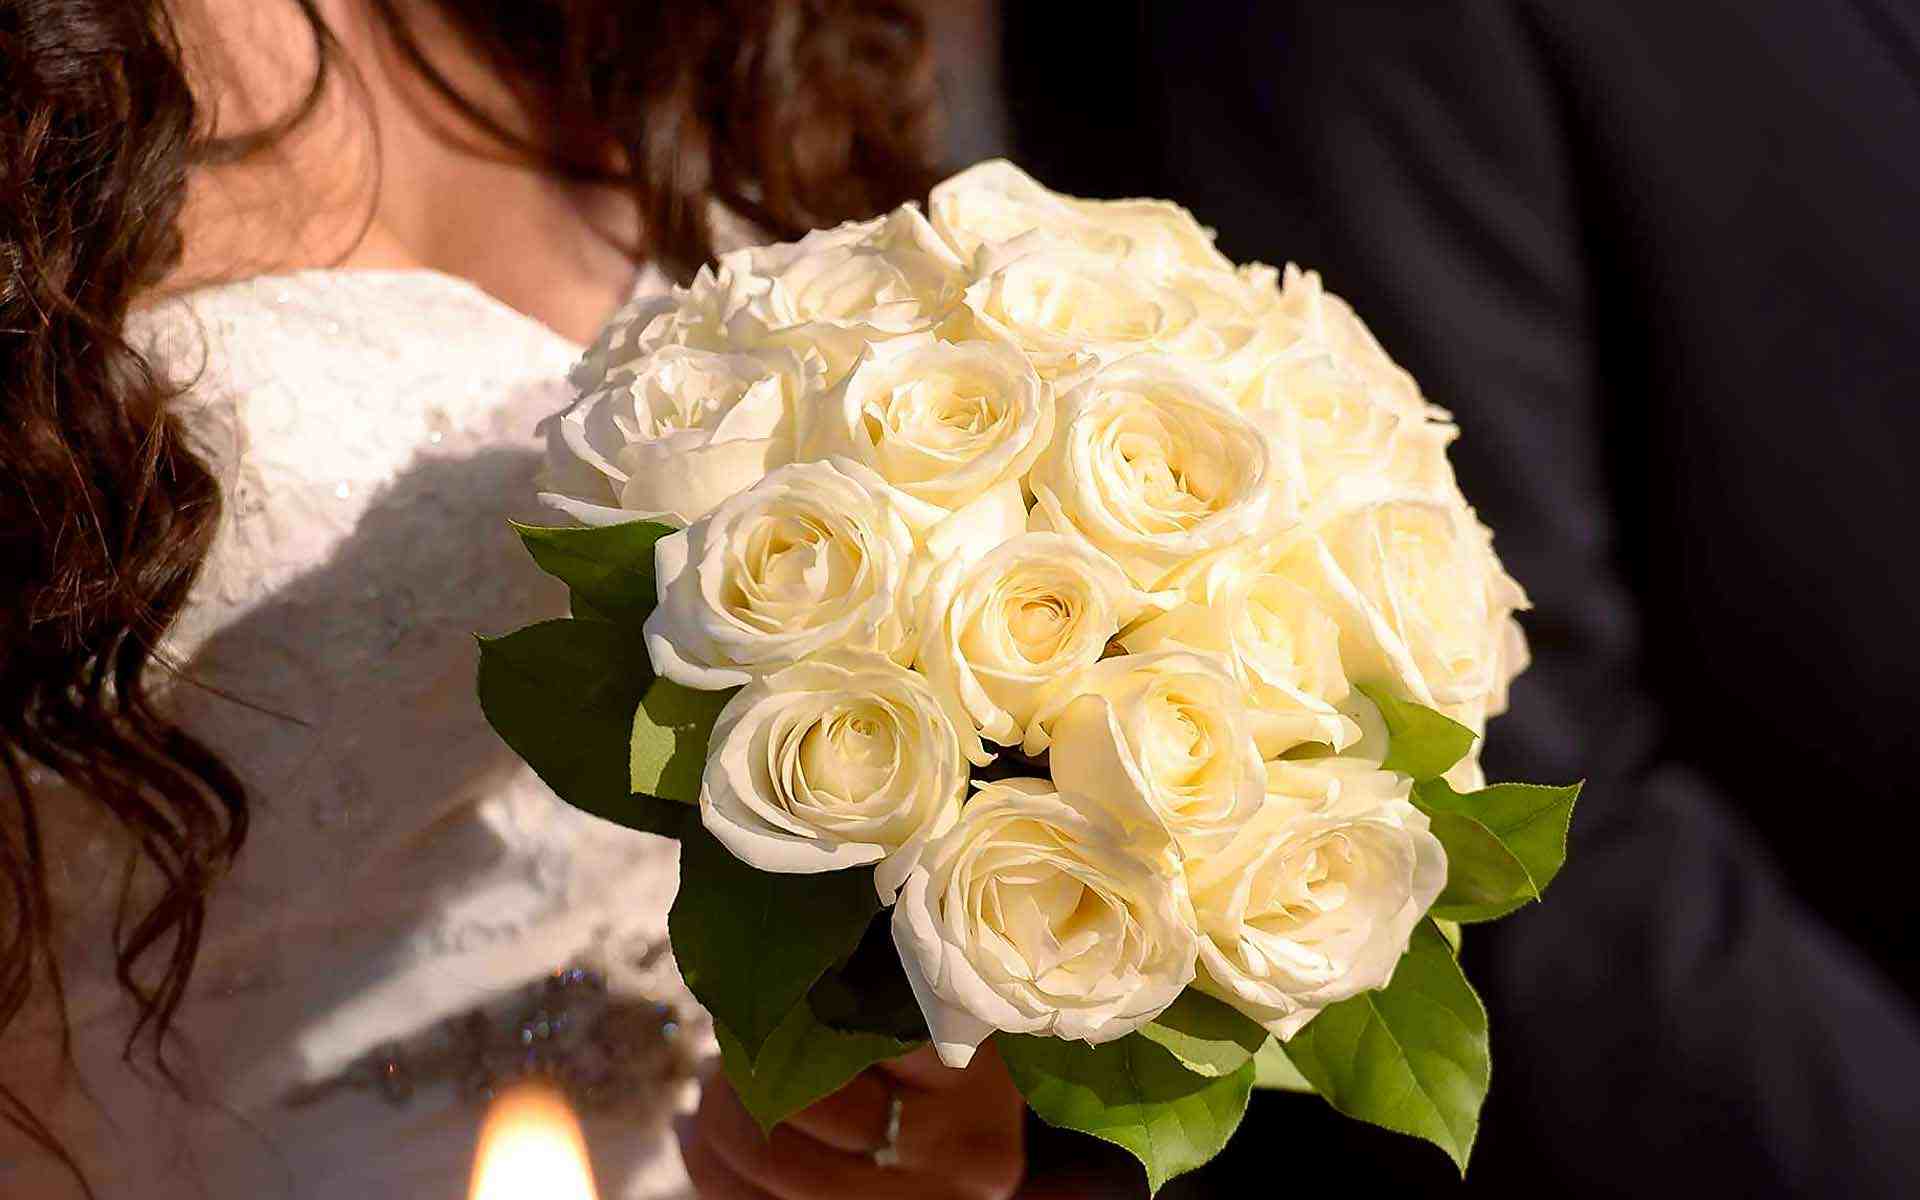 Timeless-Elegant-White-Rose-Bouquet-by-Diamond-Events-Wedding-Event-planning-services